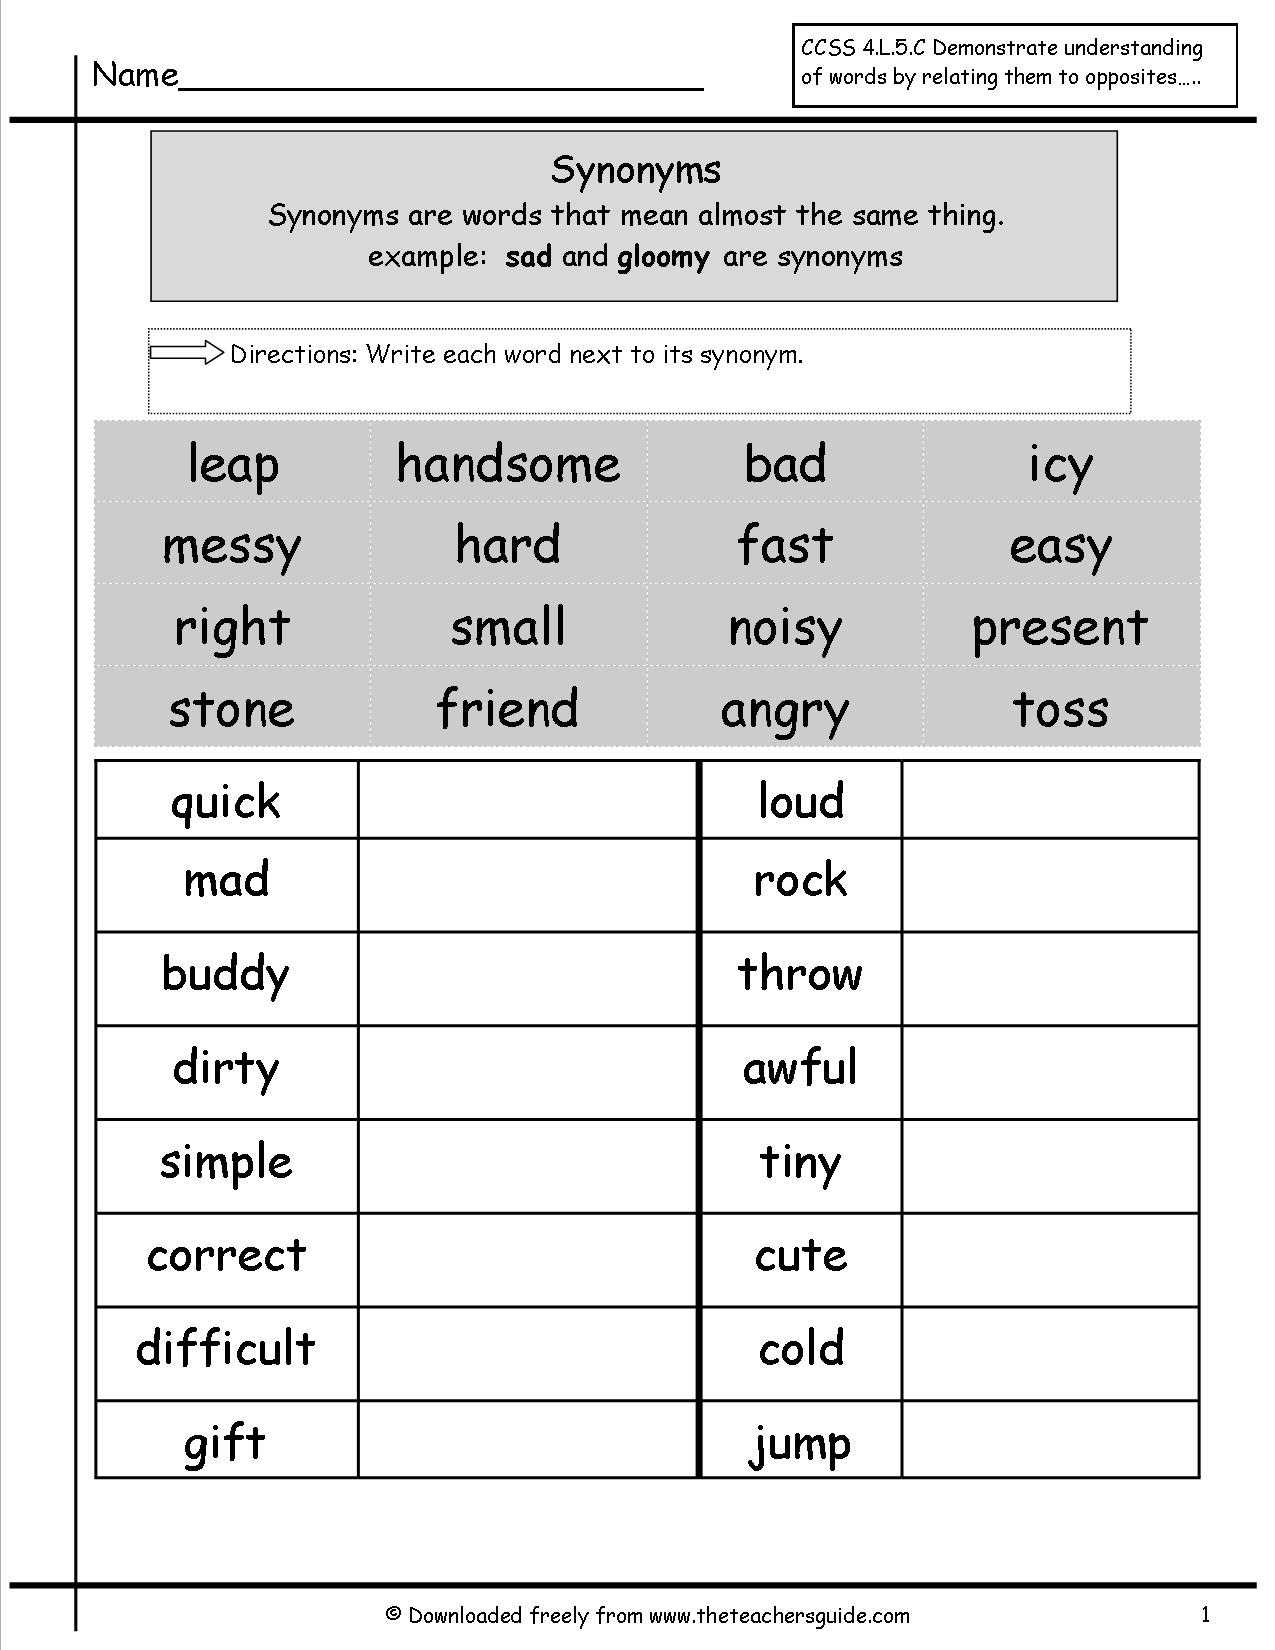 Prefix and Suffix Worksheets Pdf with Printable Opposites Worksheets the Best Worksheets Image Collection